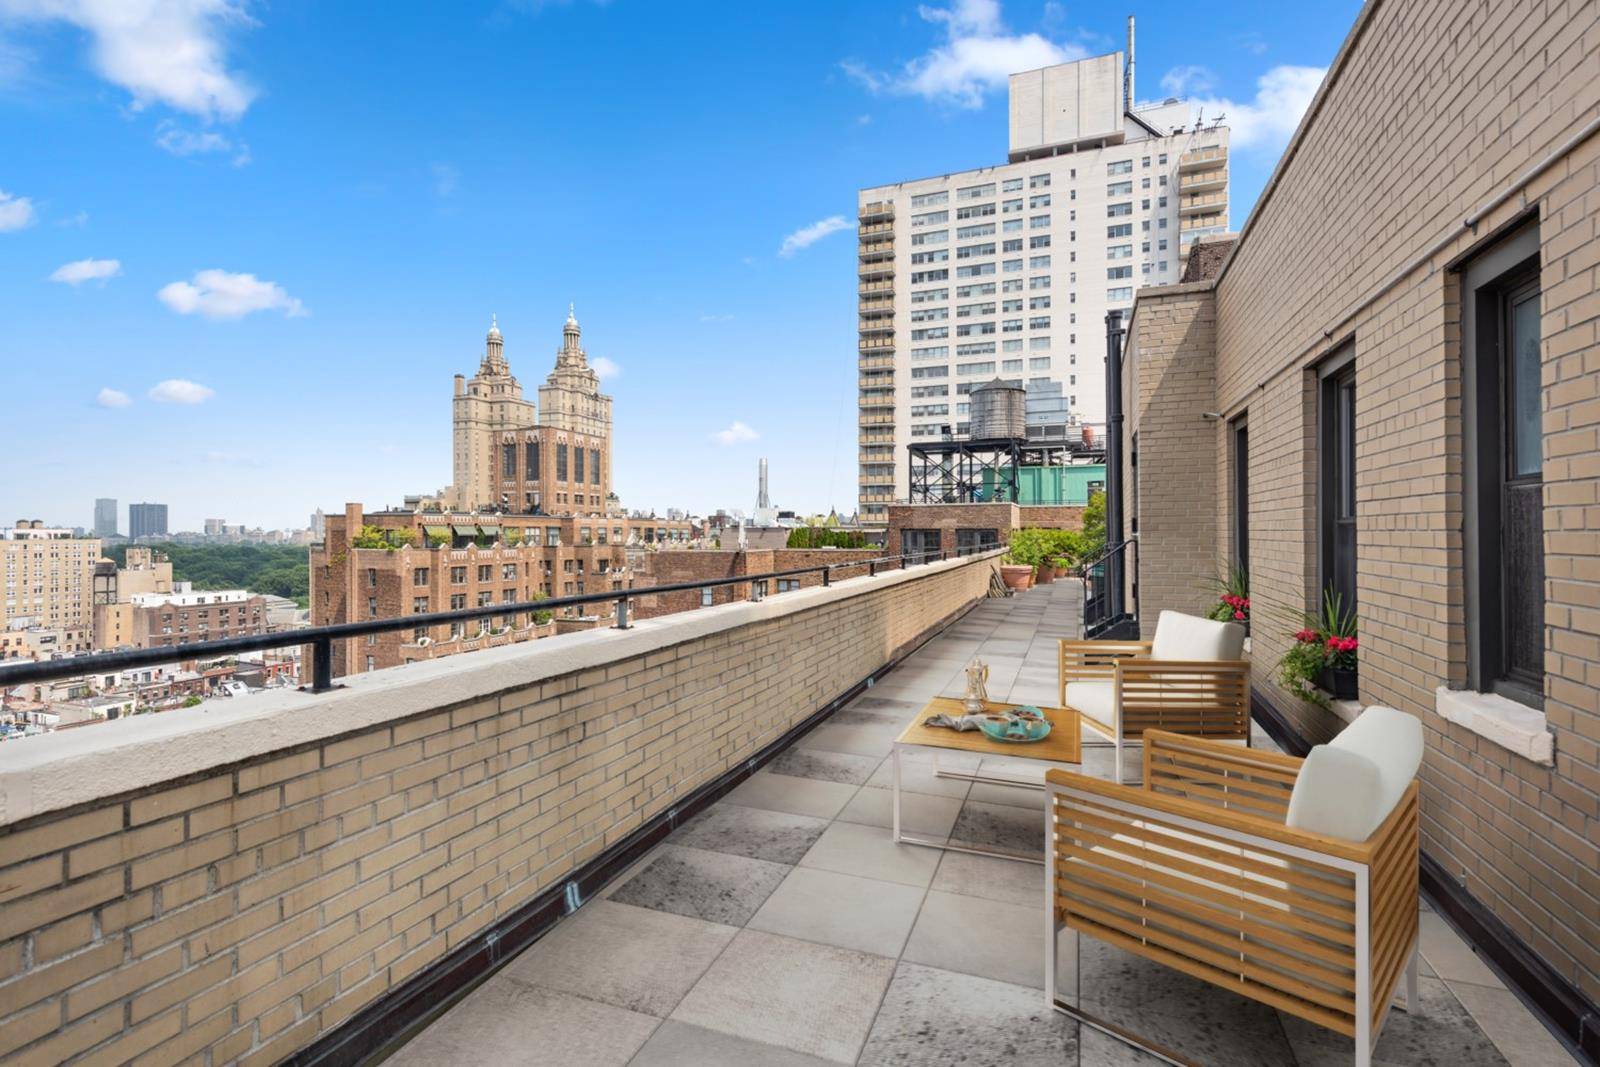 Enchanting Pre war Penthouse Condo with Sweeping Private TerraceThis beautifully renovated 1br 1ba penthouse condominium embodies all the charm and elegance of pre war New York City.